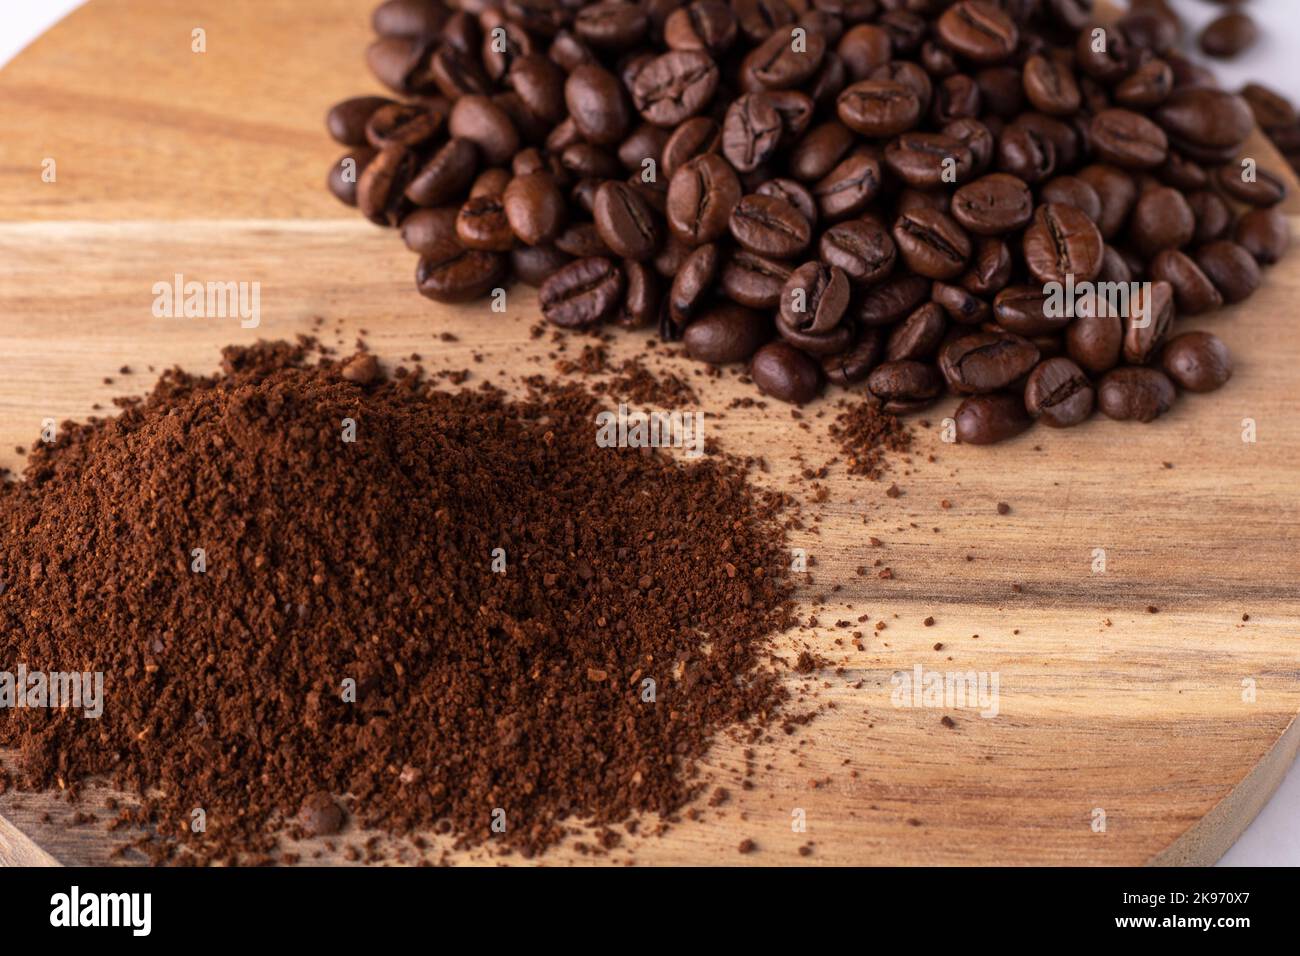 photo whole coffee beans and ground coffee lying on a wooden board top view Stock Photo